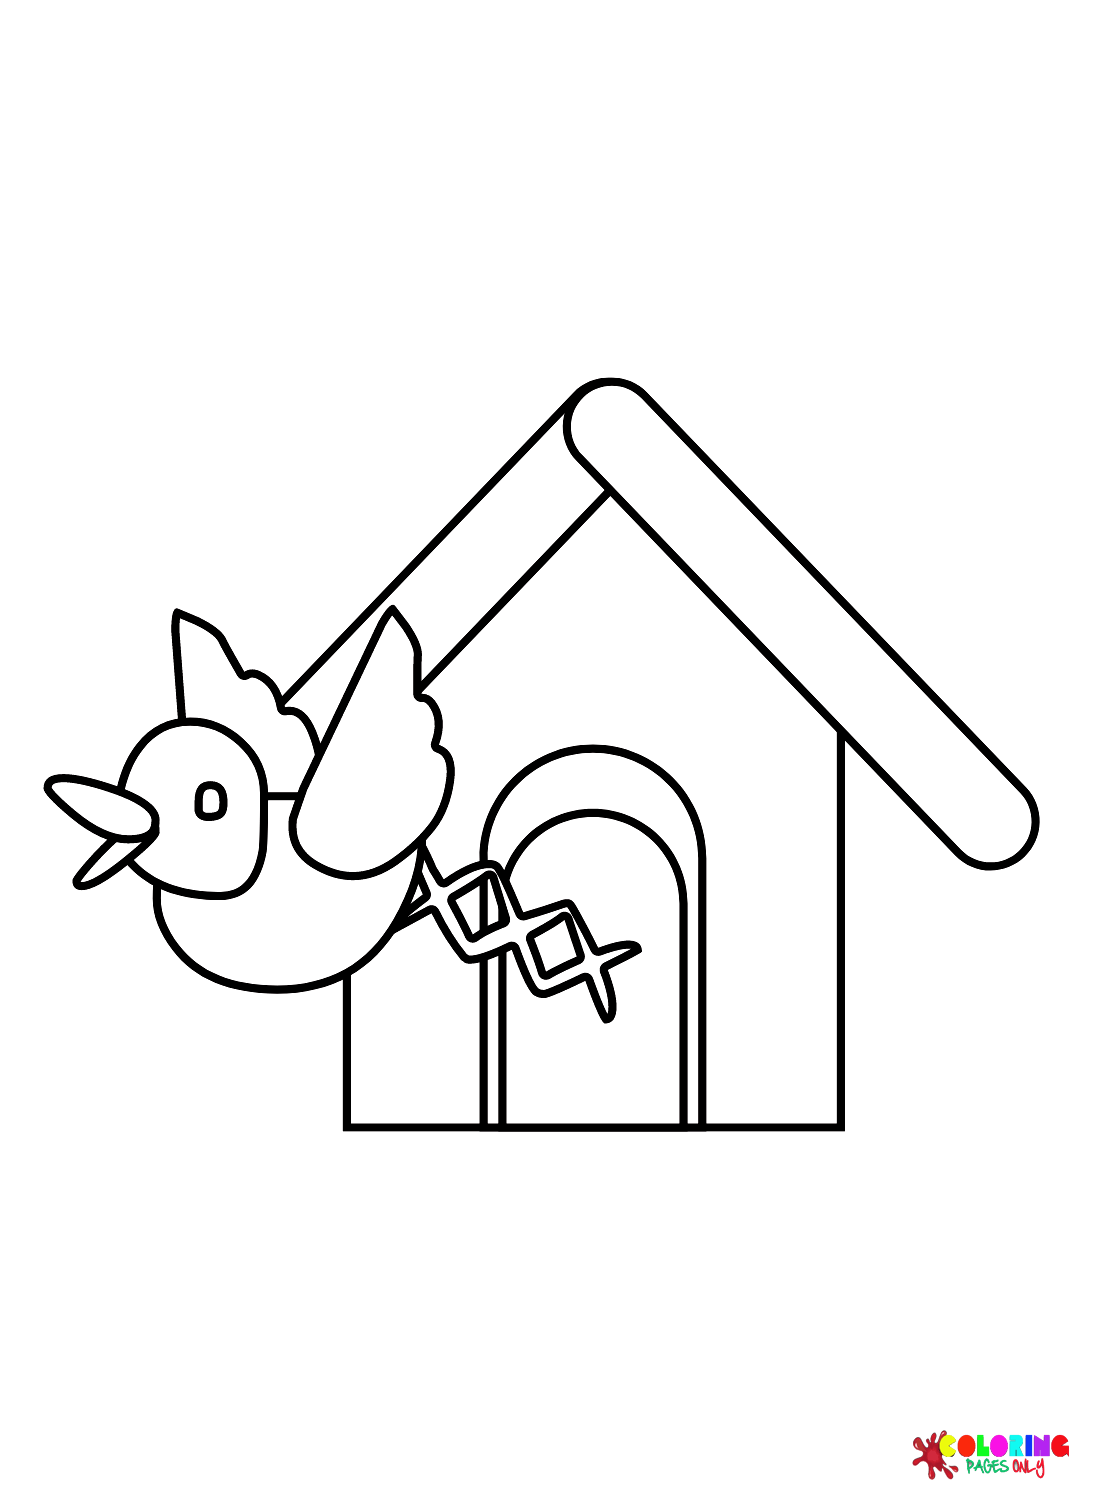 Cuckoo Watch Coloring Page